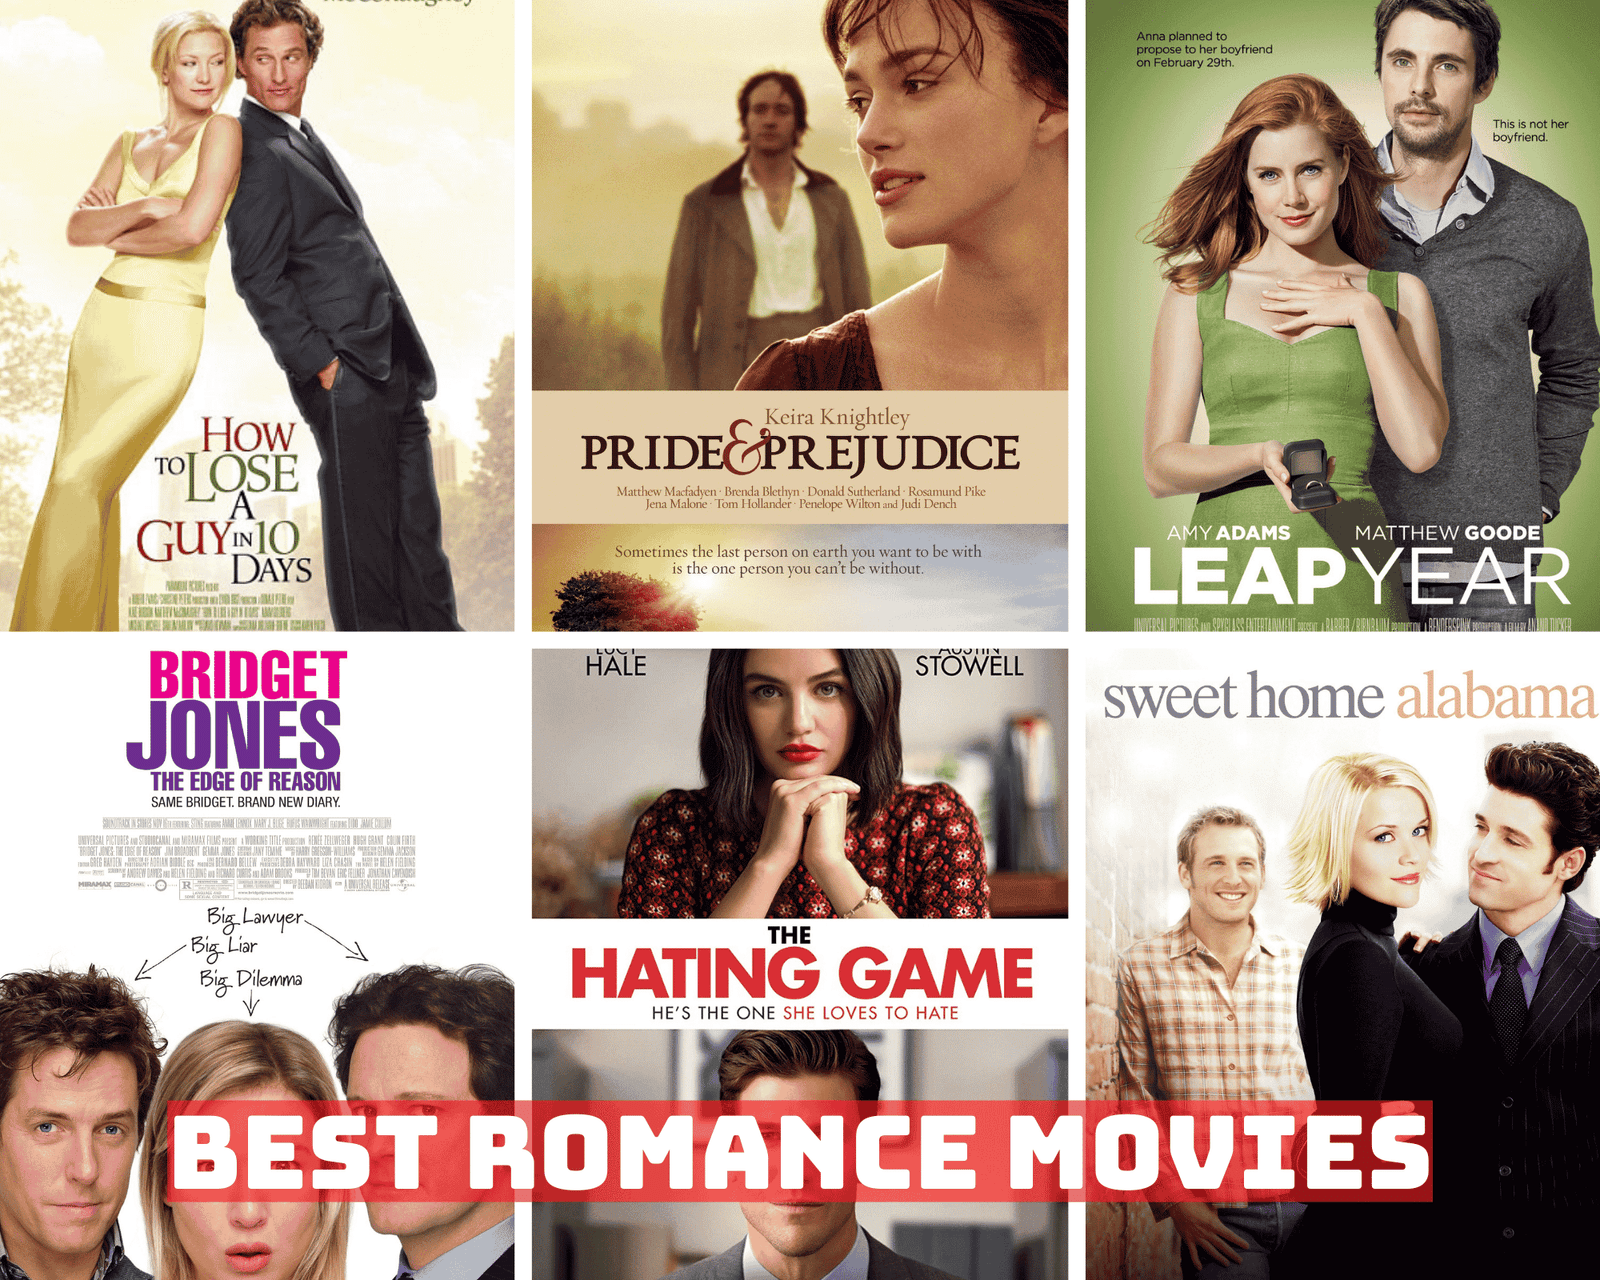 Best Romance Movies With Enemies to Lovers Trope